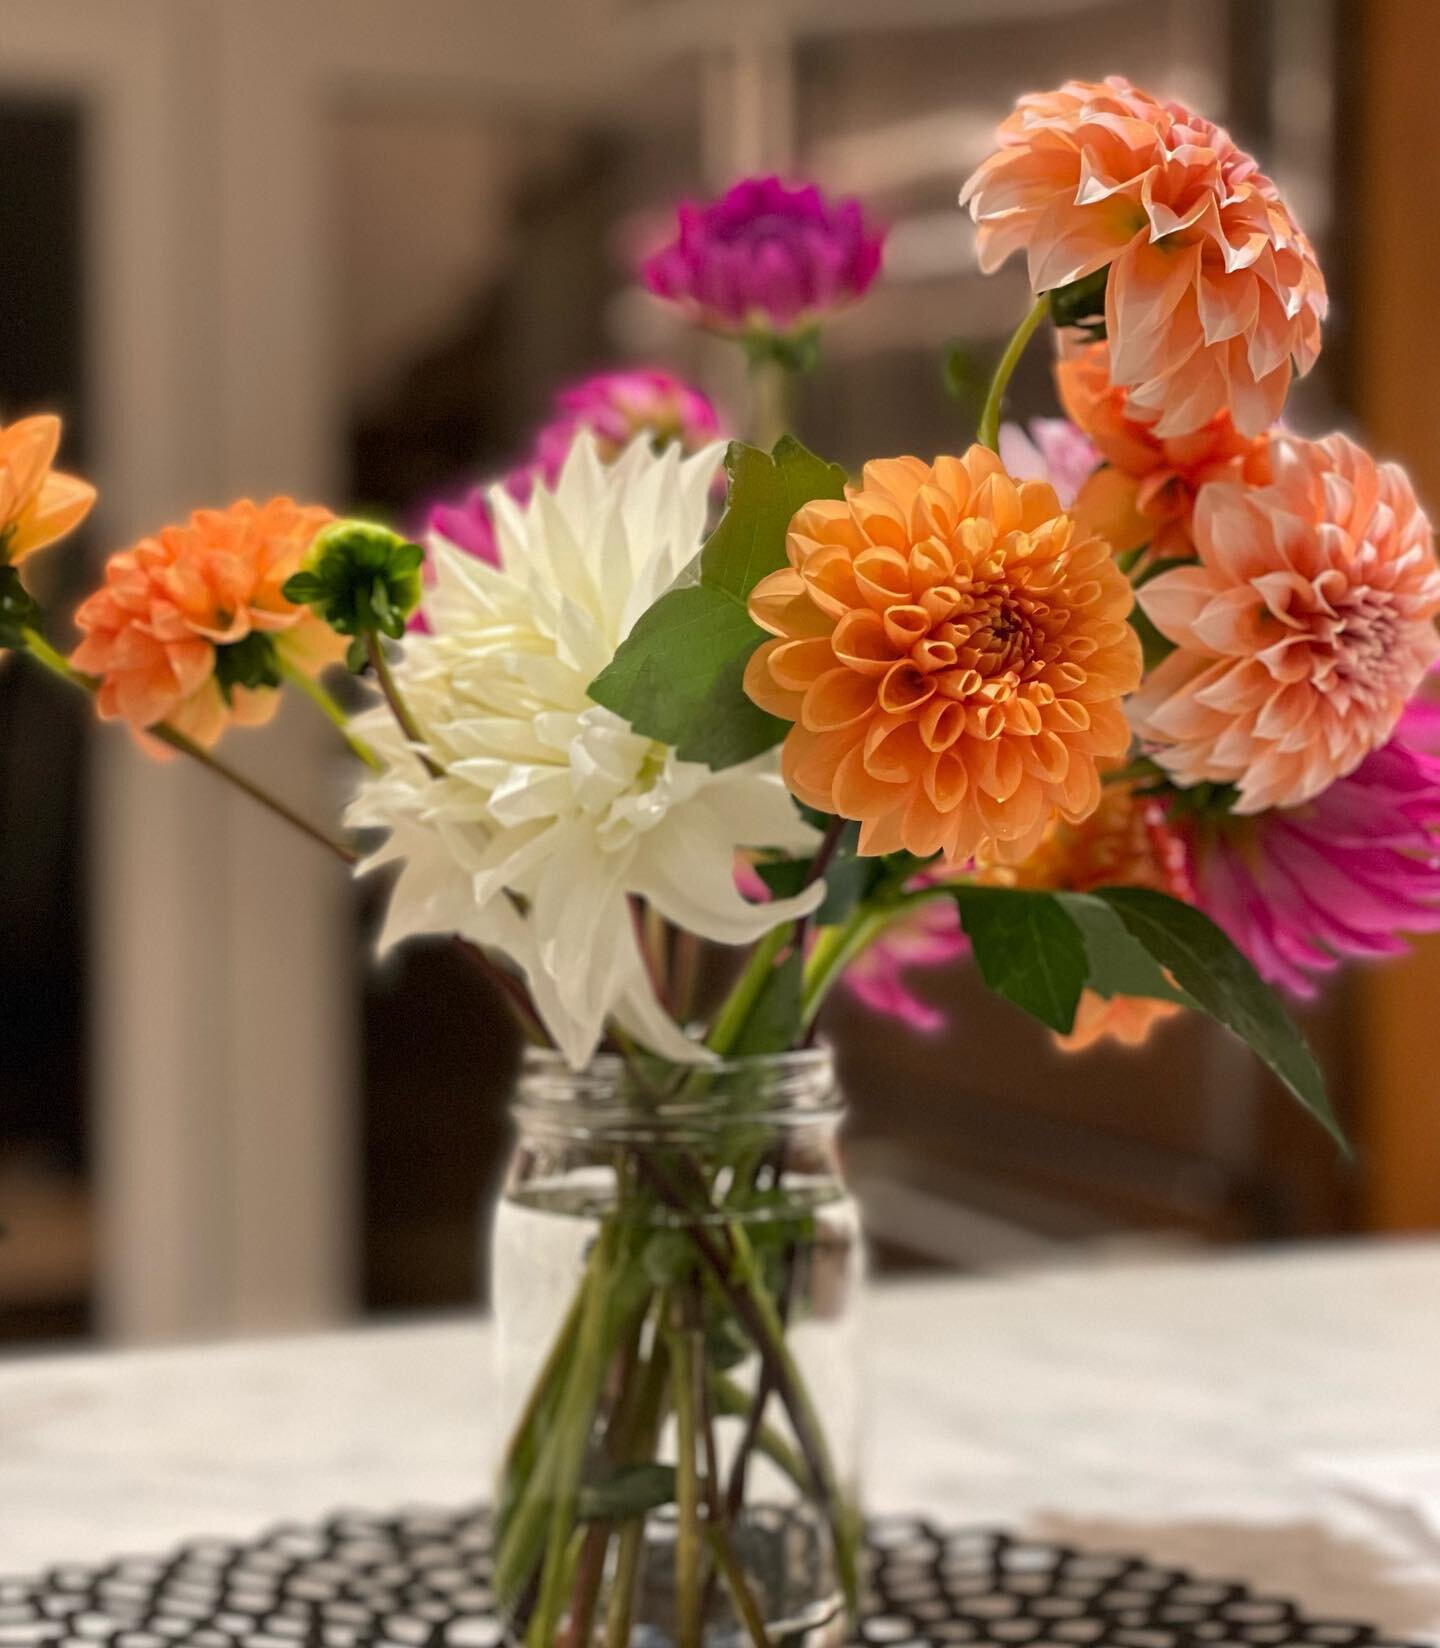 They keep coming! #dahlias #cantstopwontstop #dailyjoy